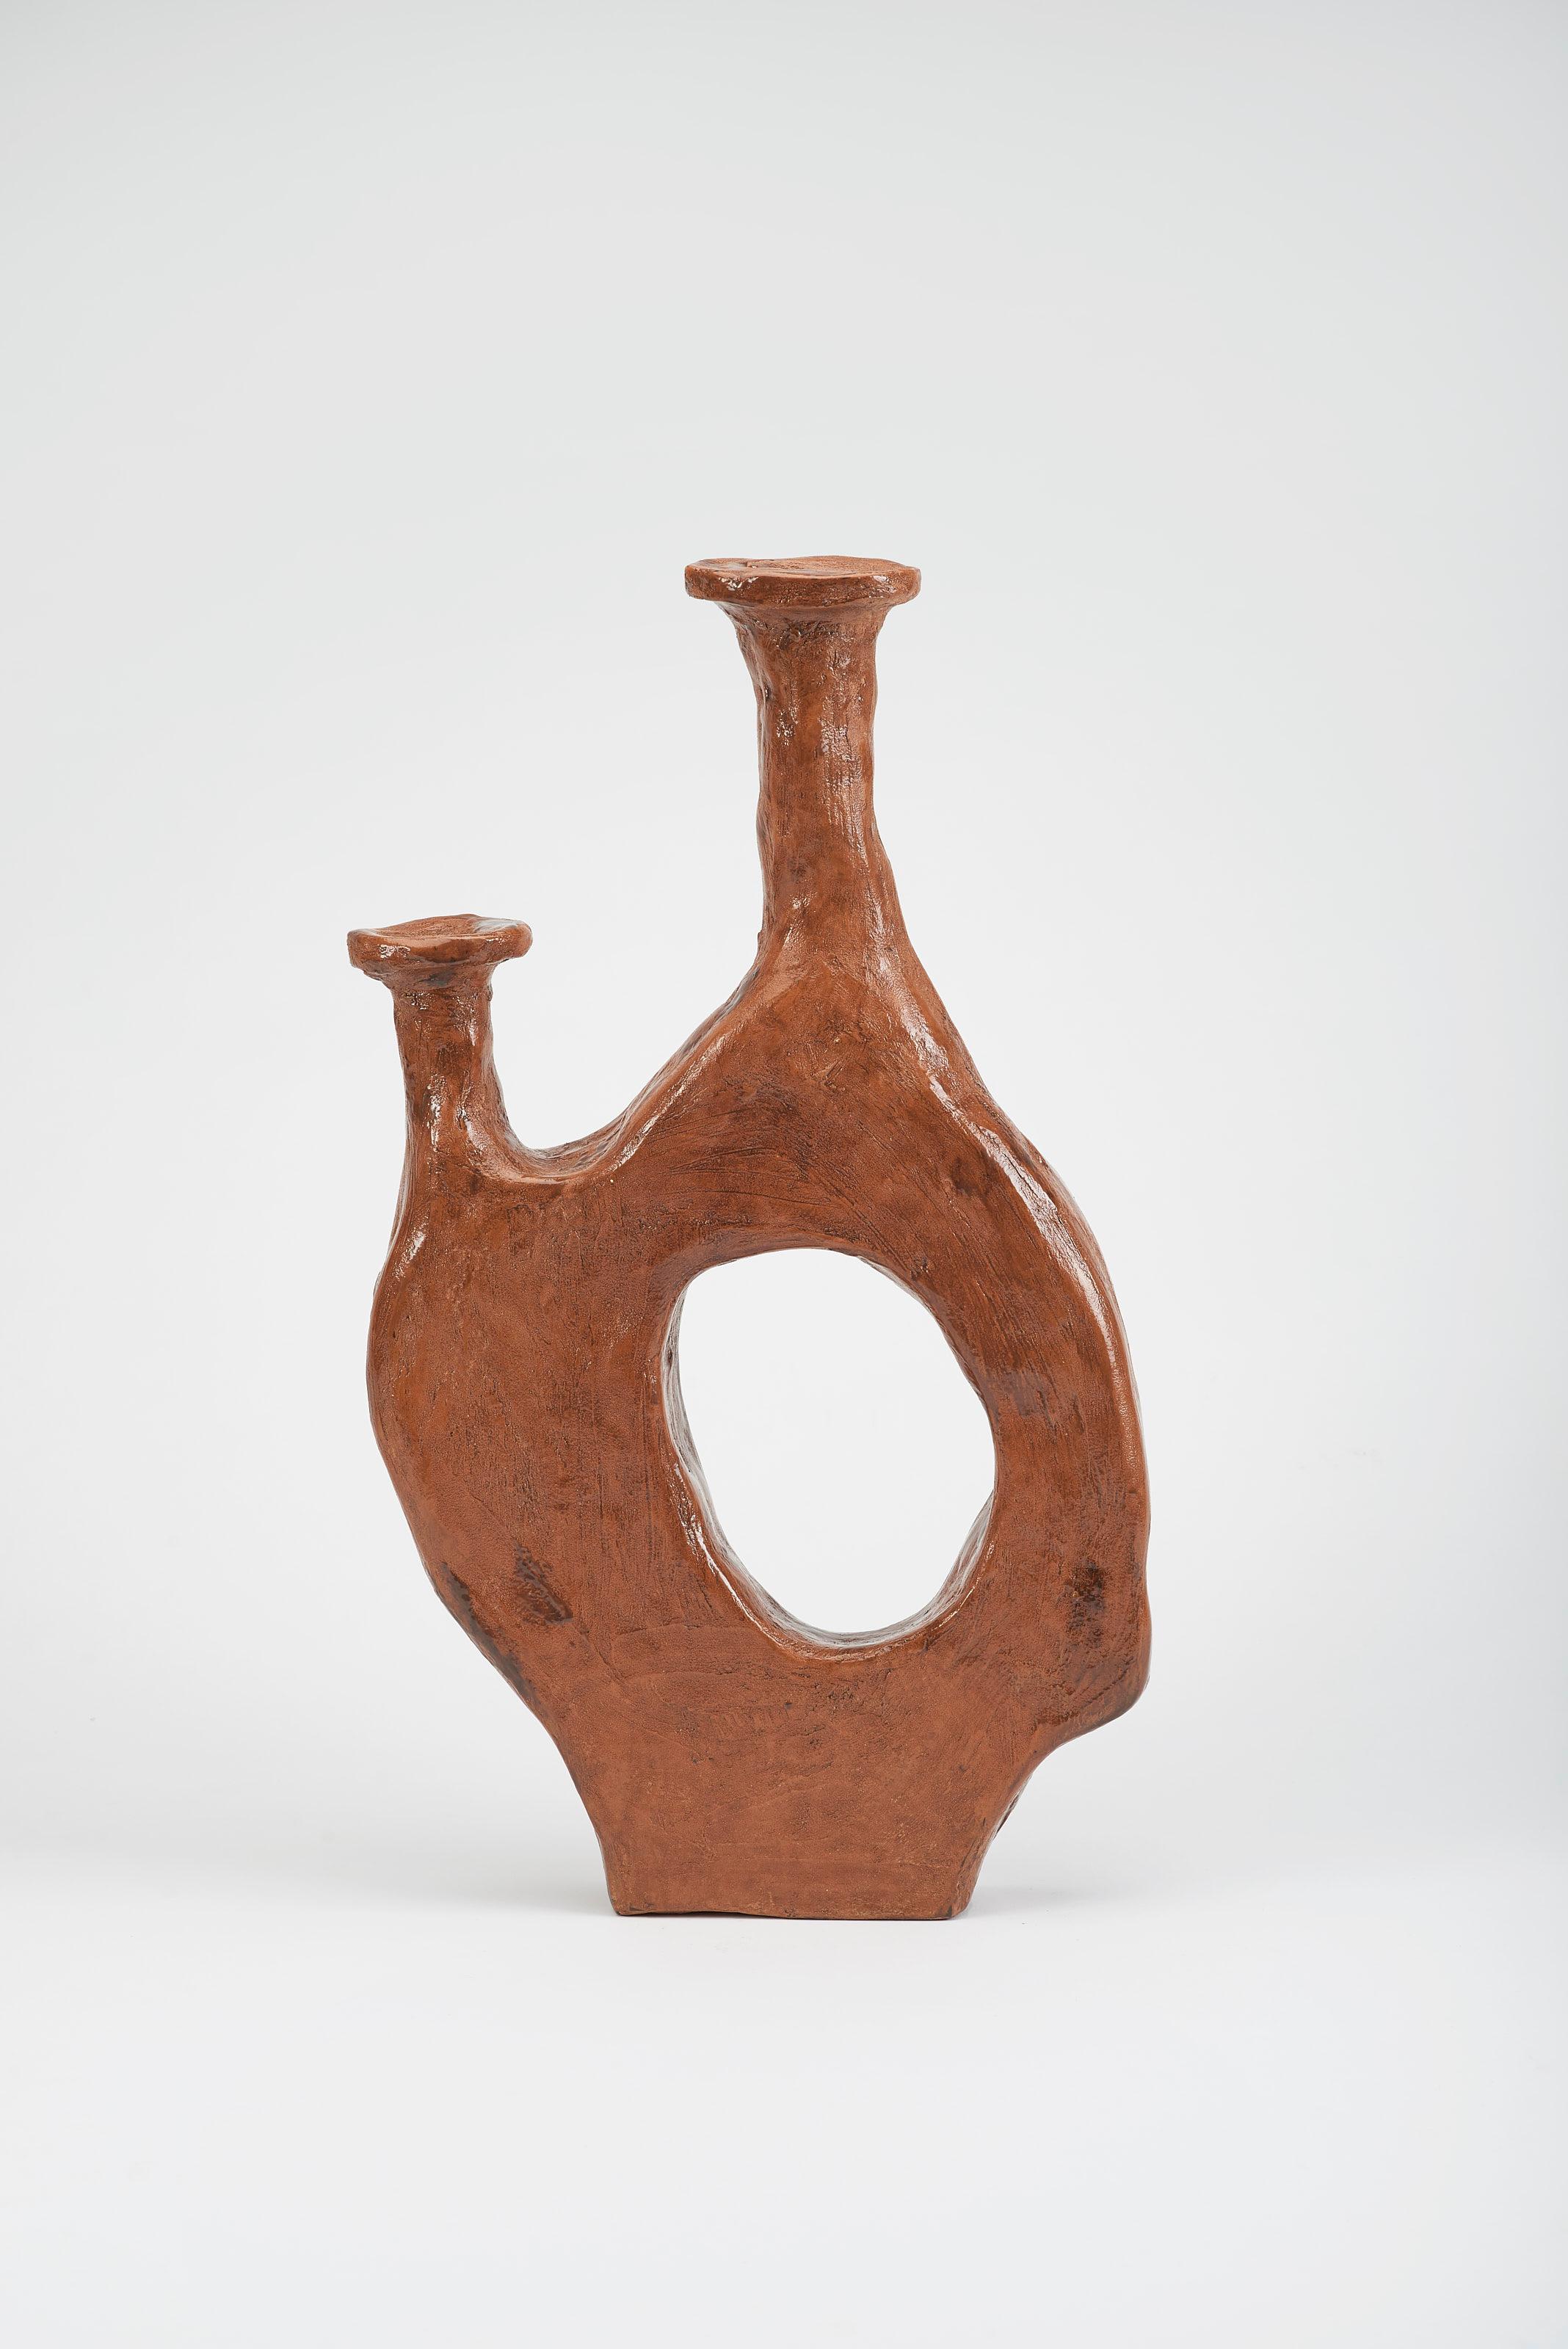 Uble Medium Vase by Willem Van Hooff
Dimensions: W 38 x D 10 x H 42 cm (Dimensions may vary as pieces are hand-made and might present slight variations in sizes)
Material: Glazed Ceramics

Core is a serie of vessels. Inspired by prehistoric african